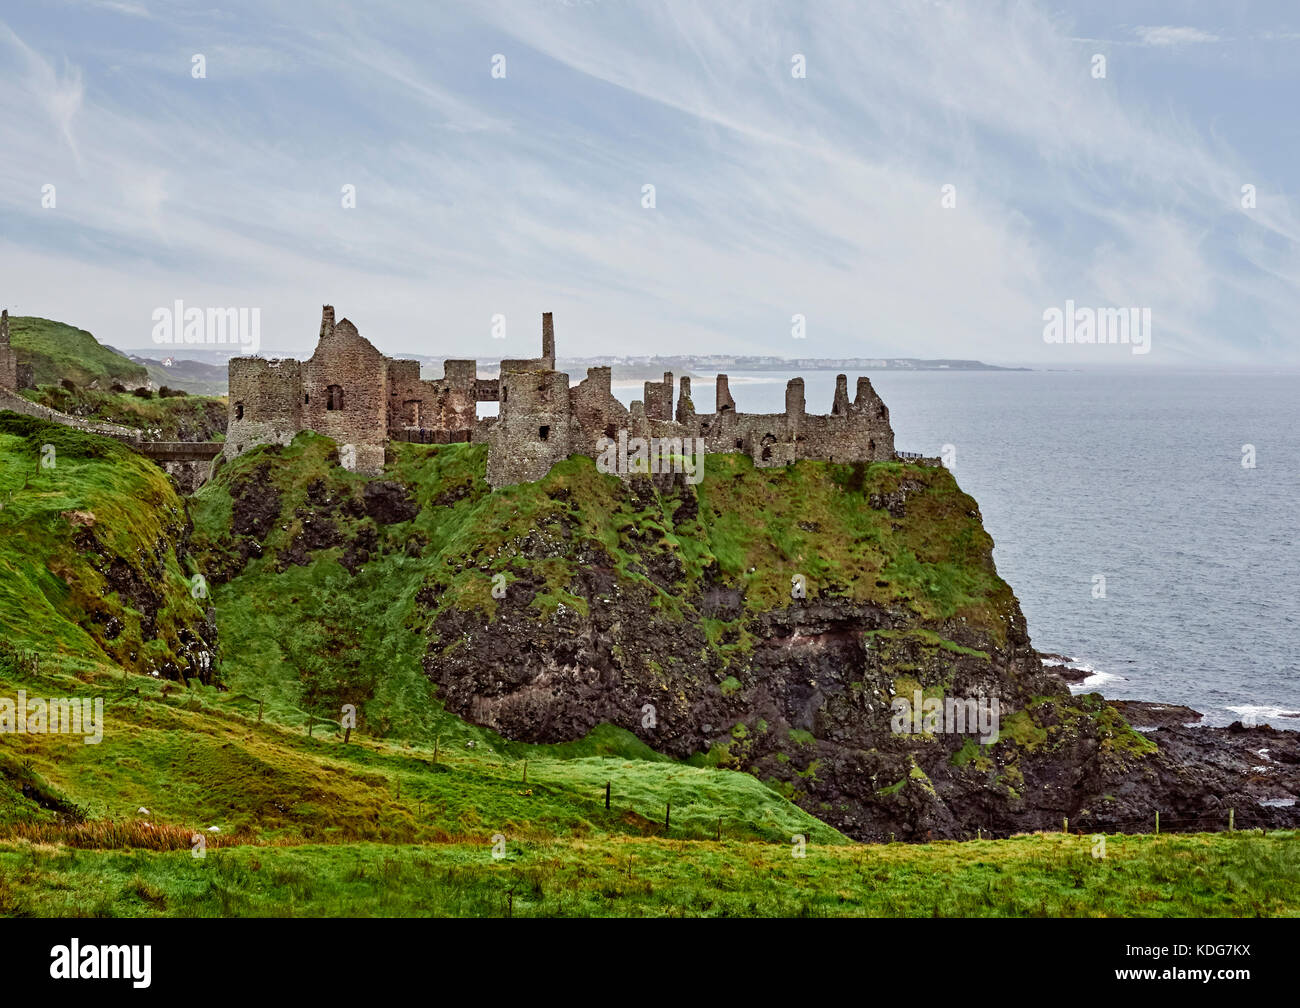 Dunluce castle used in the Game of Thrones as House of Greyjoy near Portrush on the Causeway Coastal Route County Antrim Northern Ireland Stock Photo